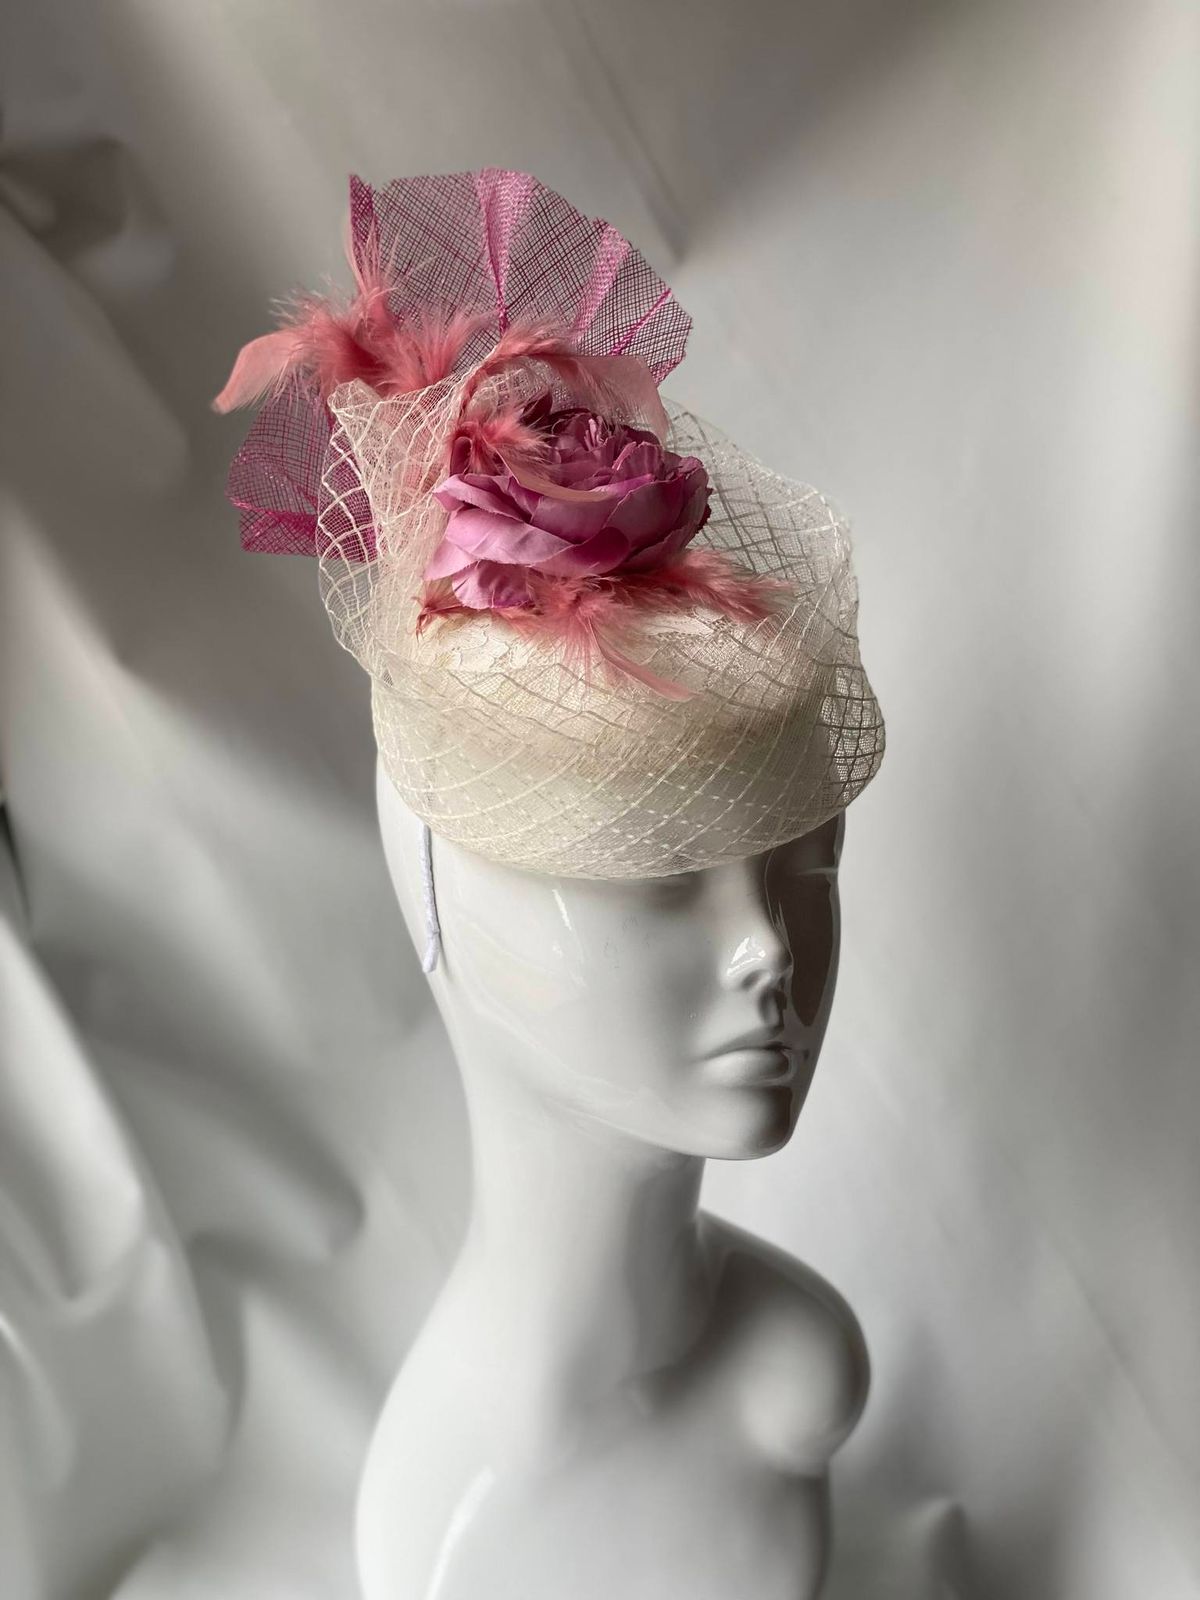 Make Your Own Fascinator